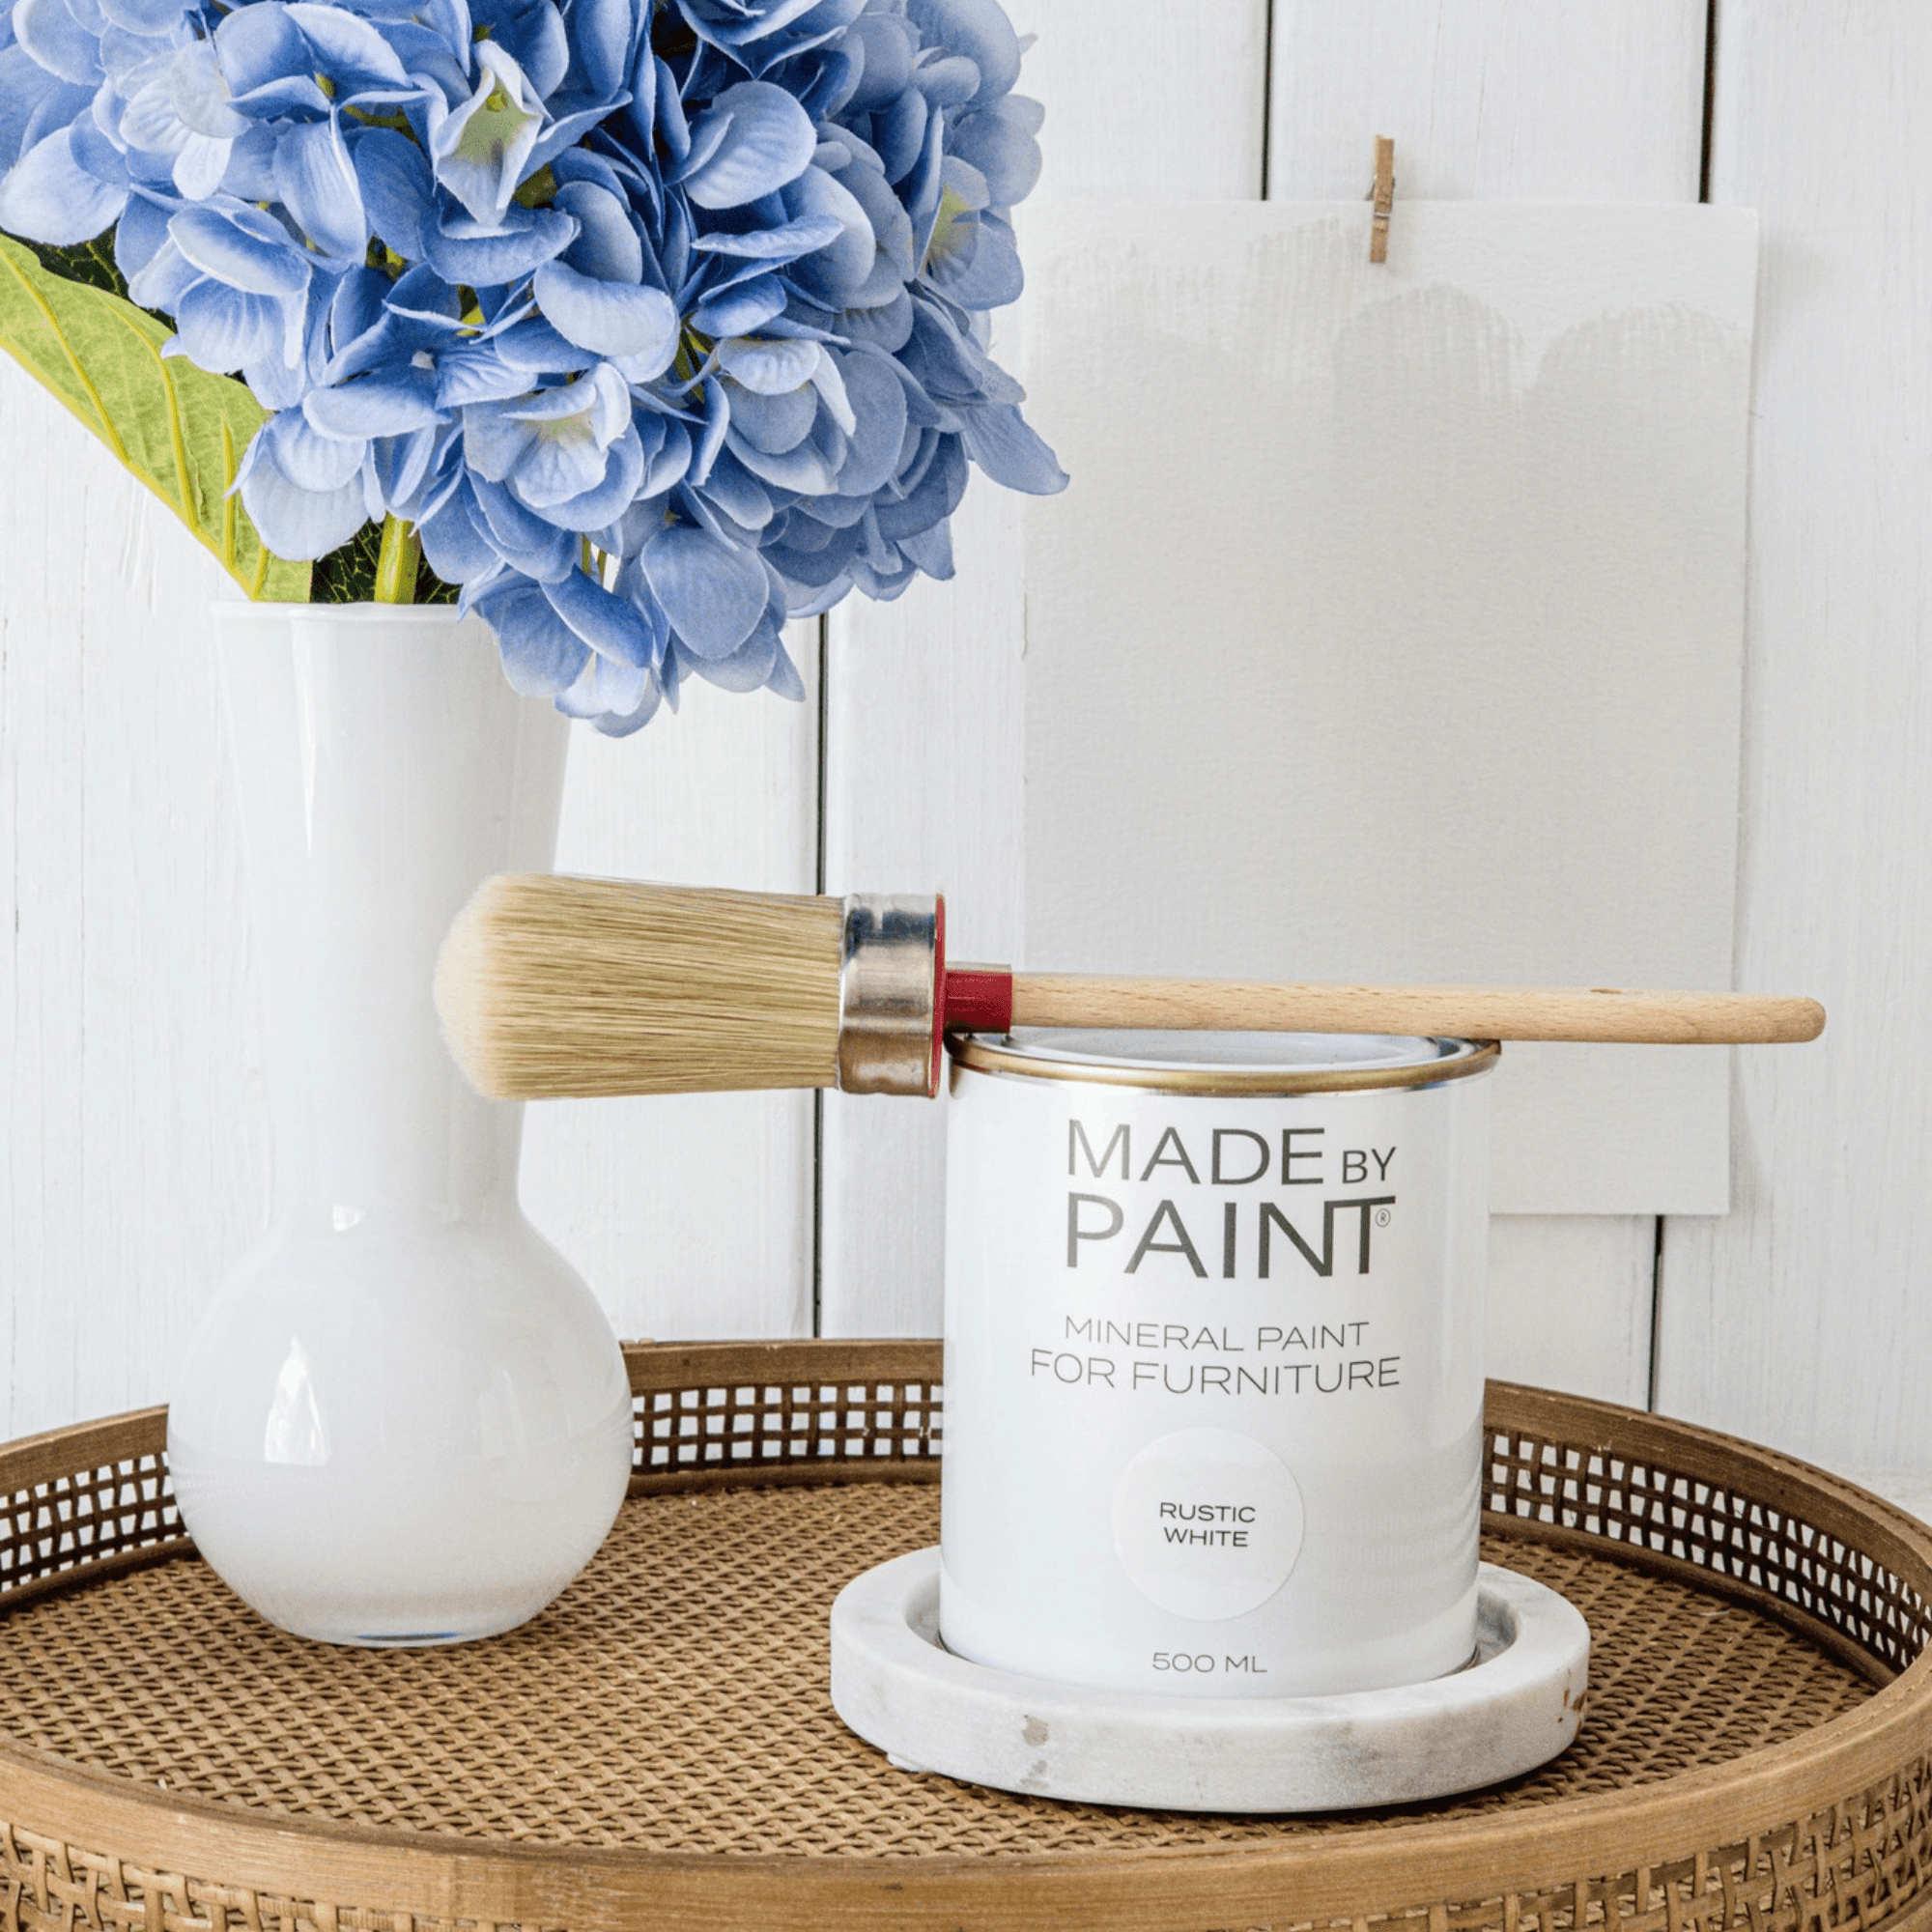 'Rustic White' Mineral Paint, Made By Paint, 500ml (White)